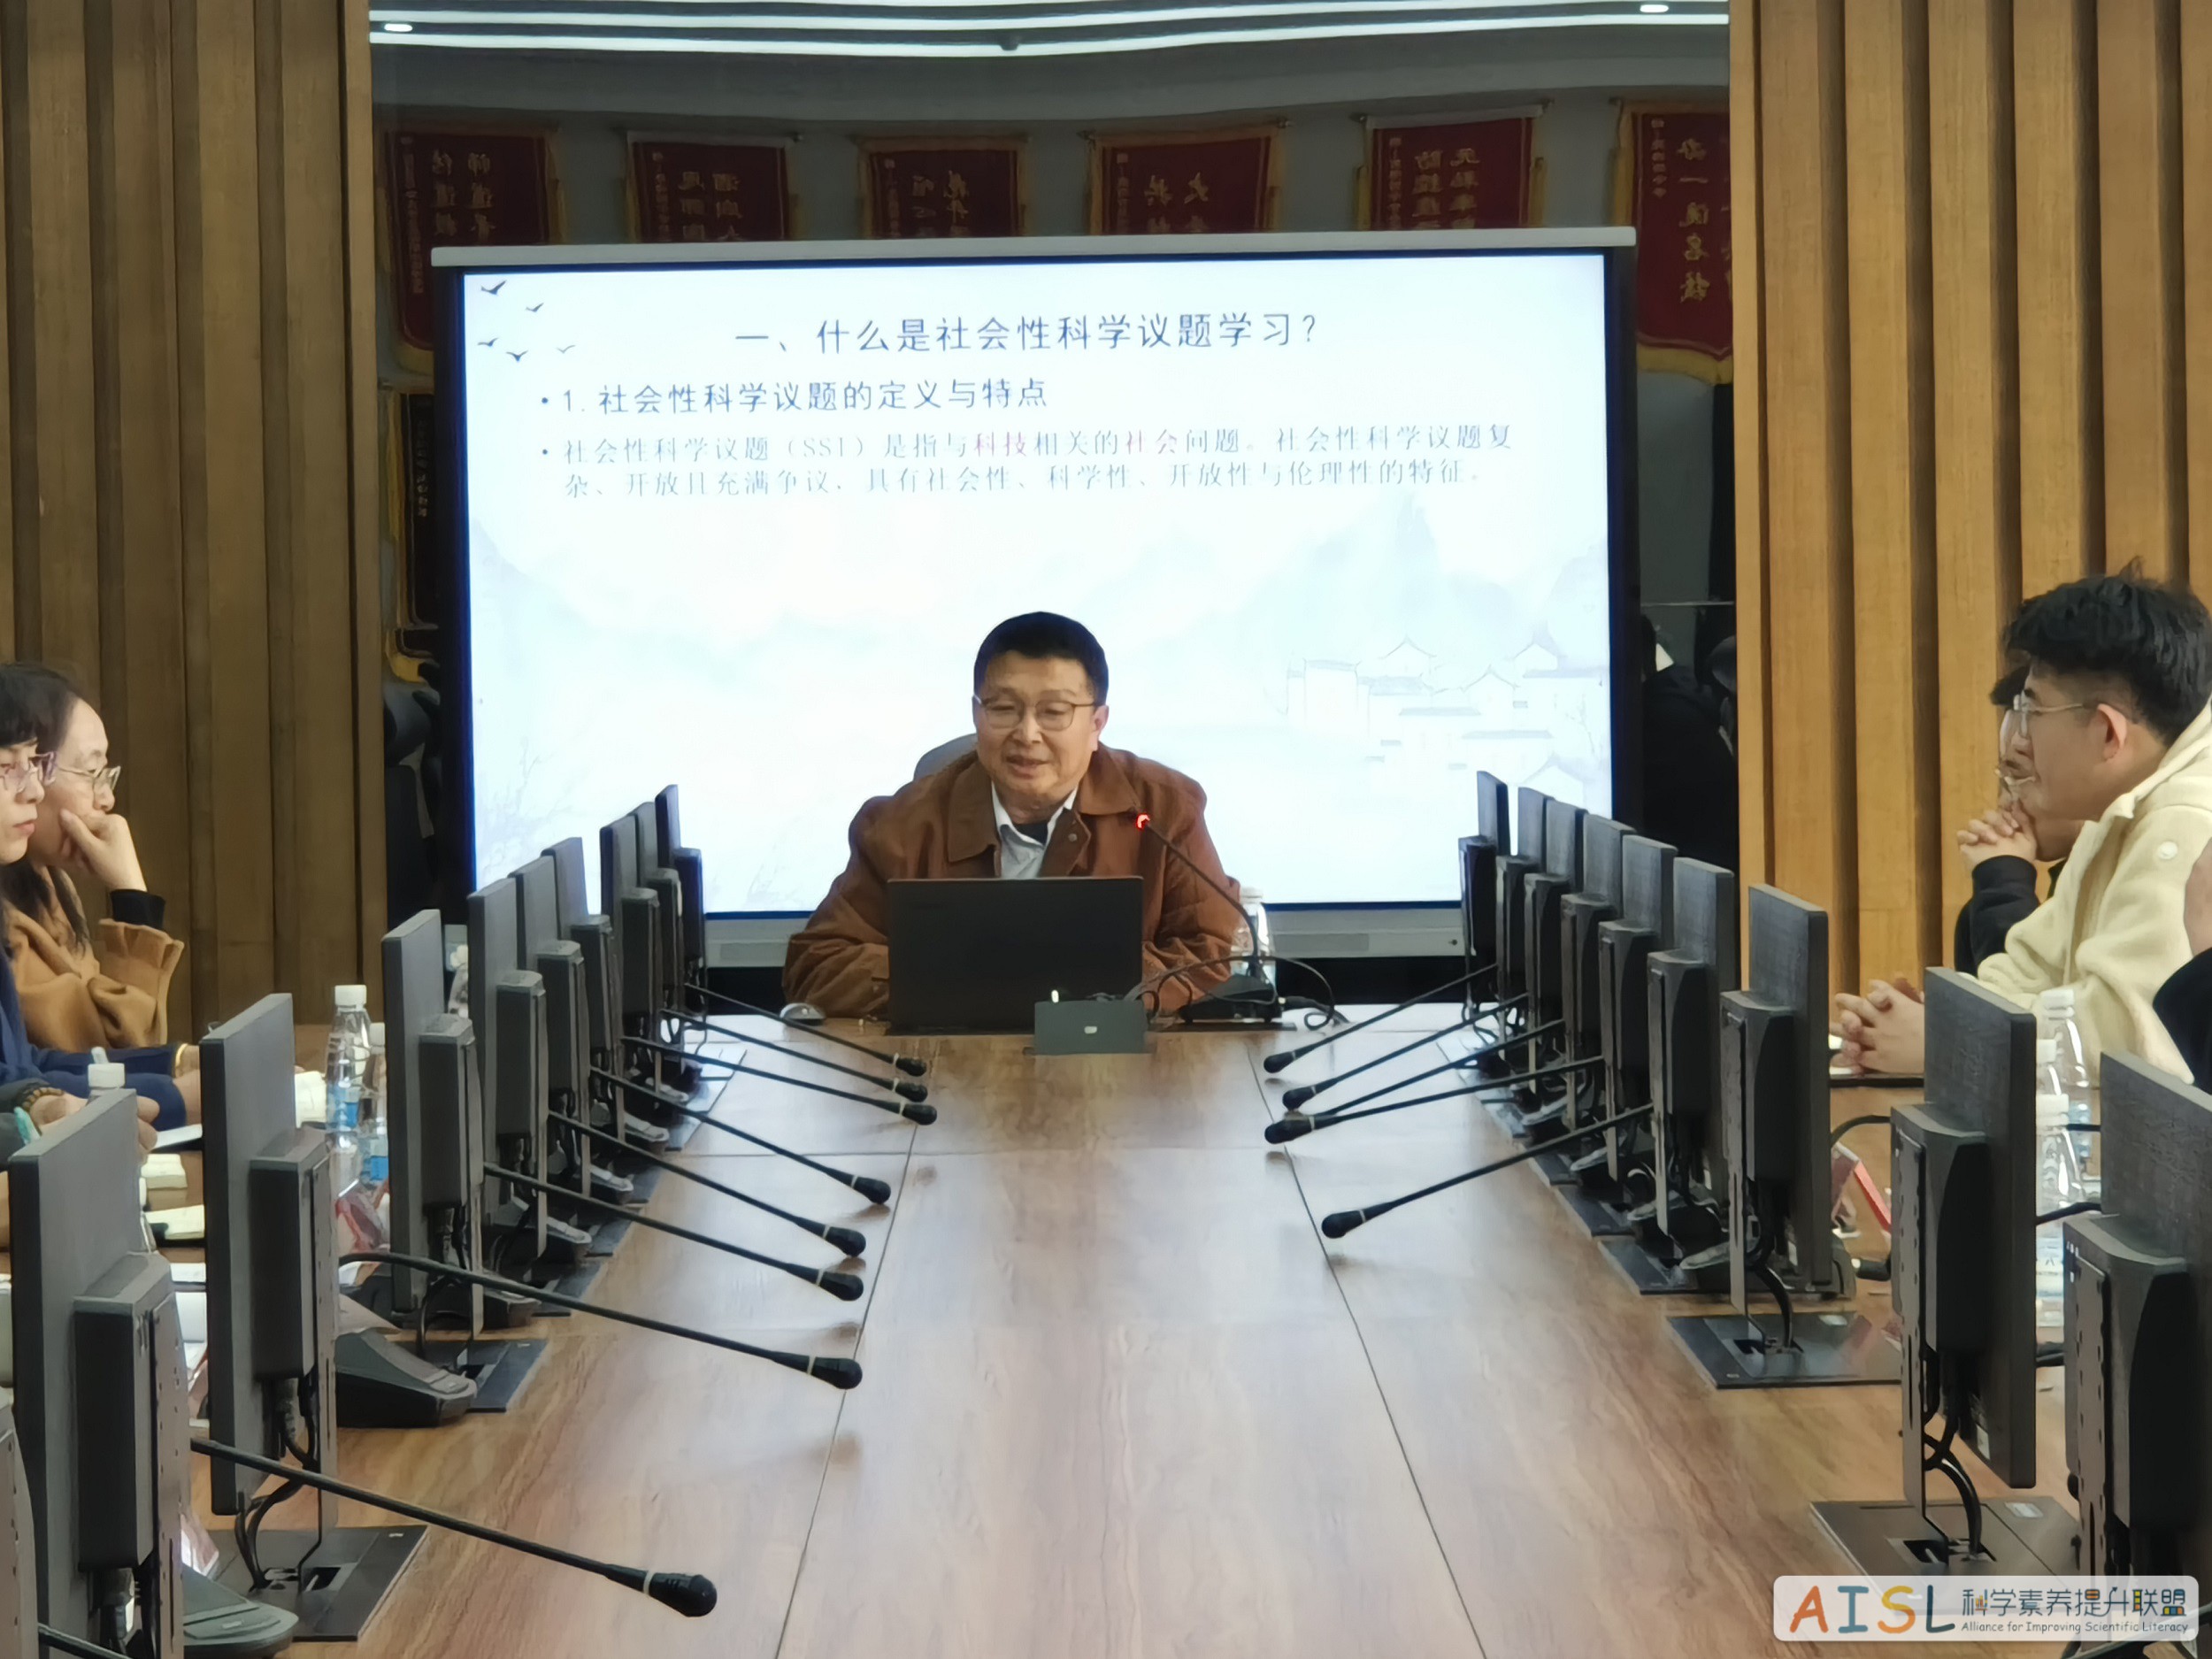 [SSI Learning] 山东省威海市社会性科学议题学习课题阶段性推进工作会议纪要<br>Minutes of the Phased Work Promotion Conference of SSI-L Project in Weihai, Shandong Province插图5